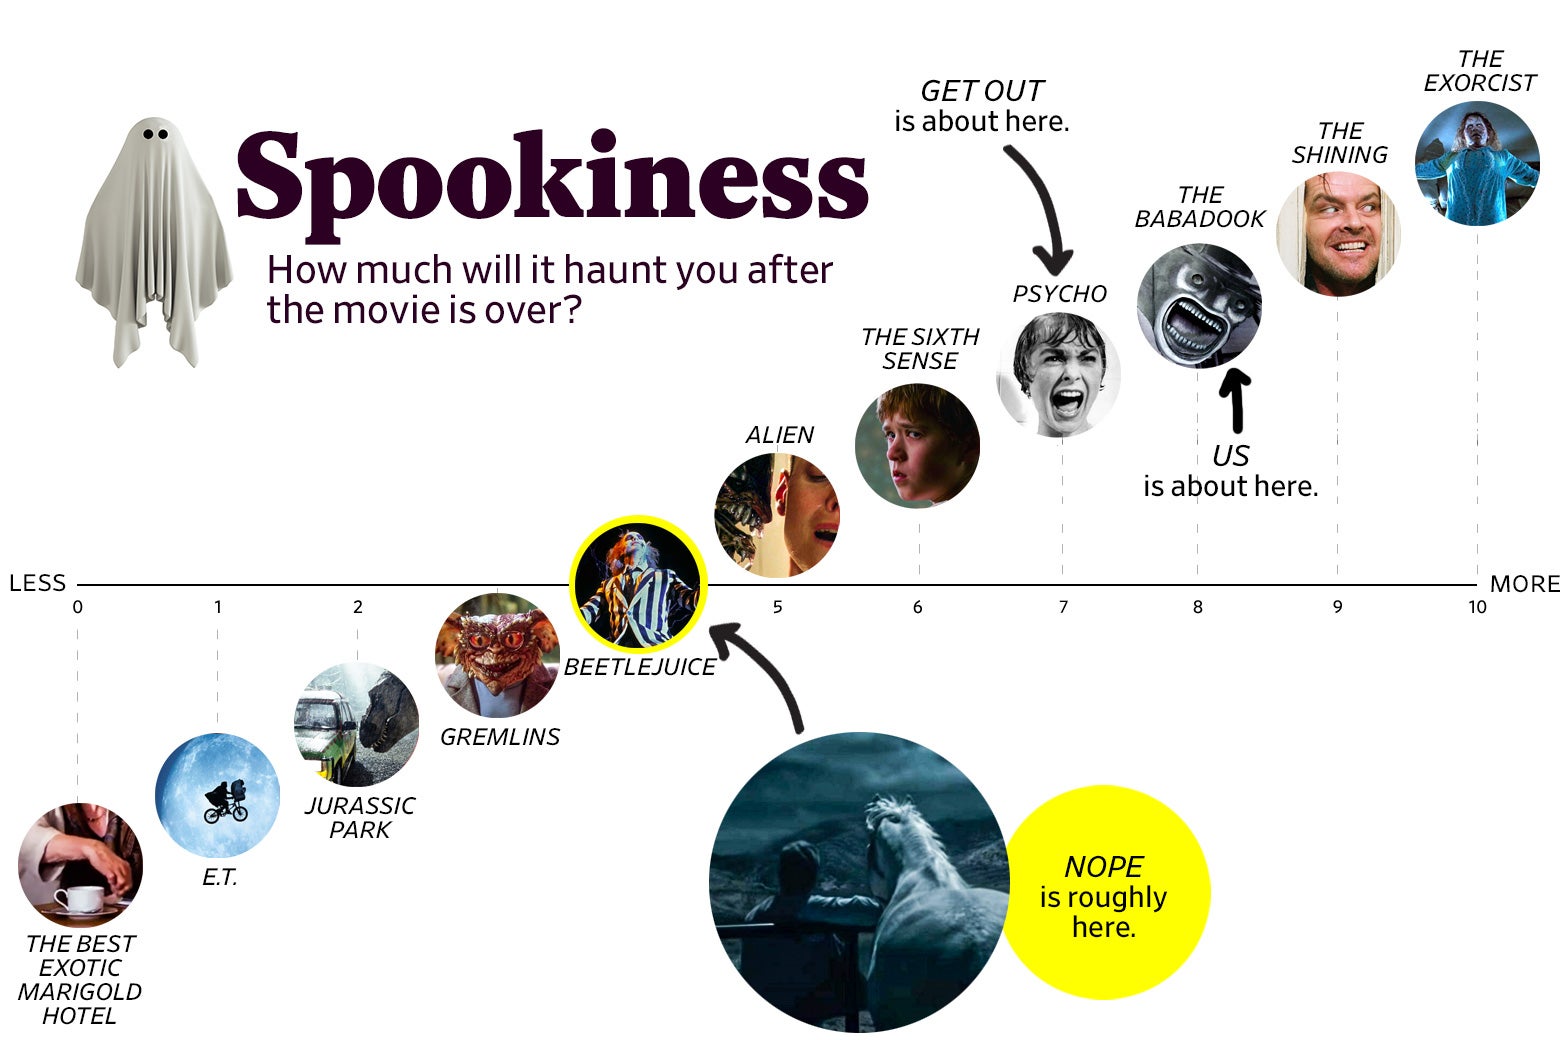 A chart titled “Spookiness: How much will it haunt you after the movie is over?” shows that Nope ranks a 4 in spookiness, roughly the same as Beetlejuice. Us ranks an 8, roughly the same as The Babadook, and Get Out rated a 7, roughly the same as Psycho. The scale ranges from The Best Exotic Marigold Hotel (0) to The Exorcist (10).